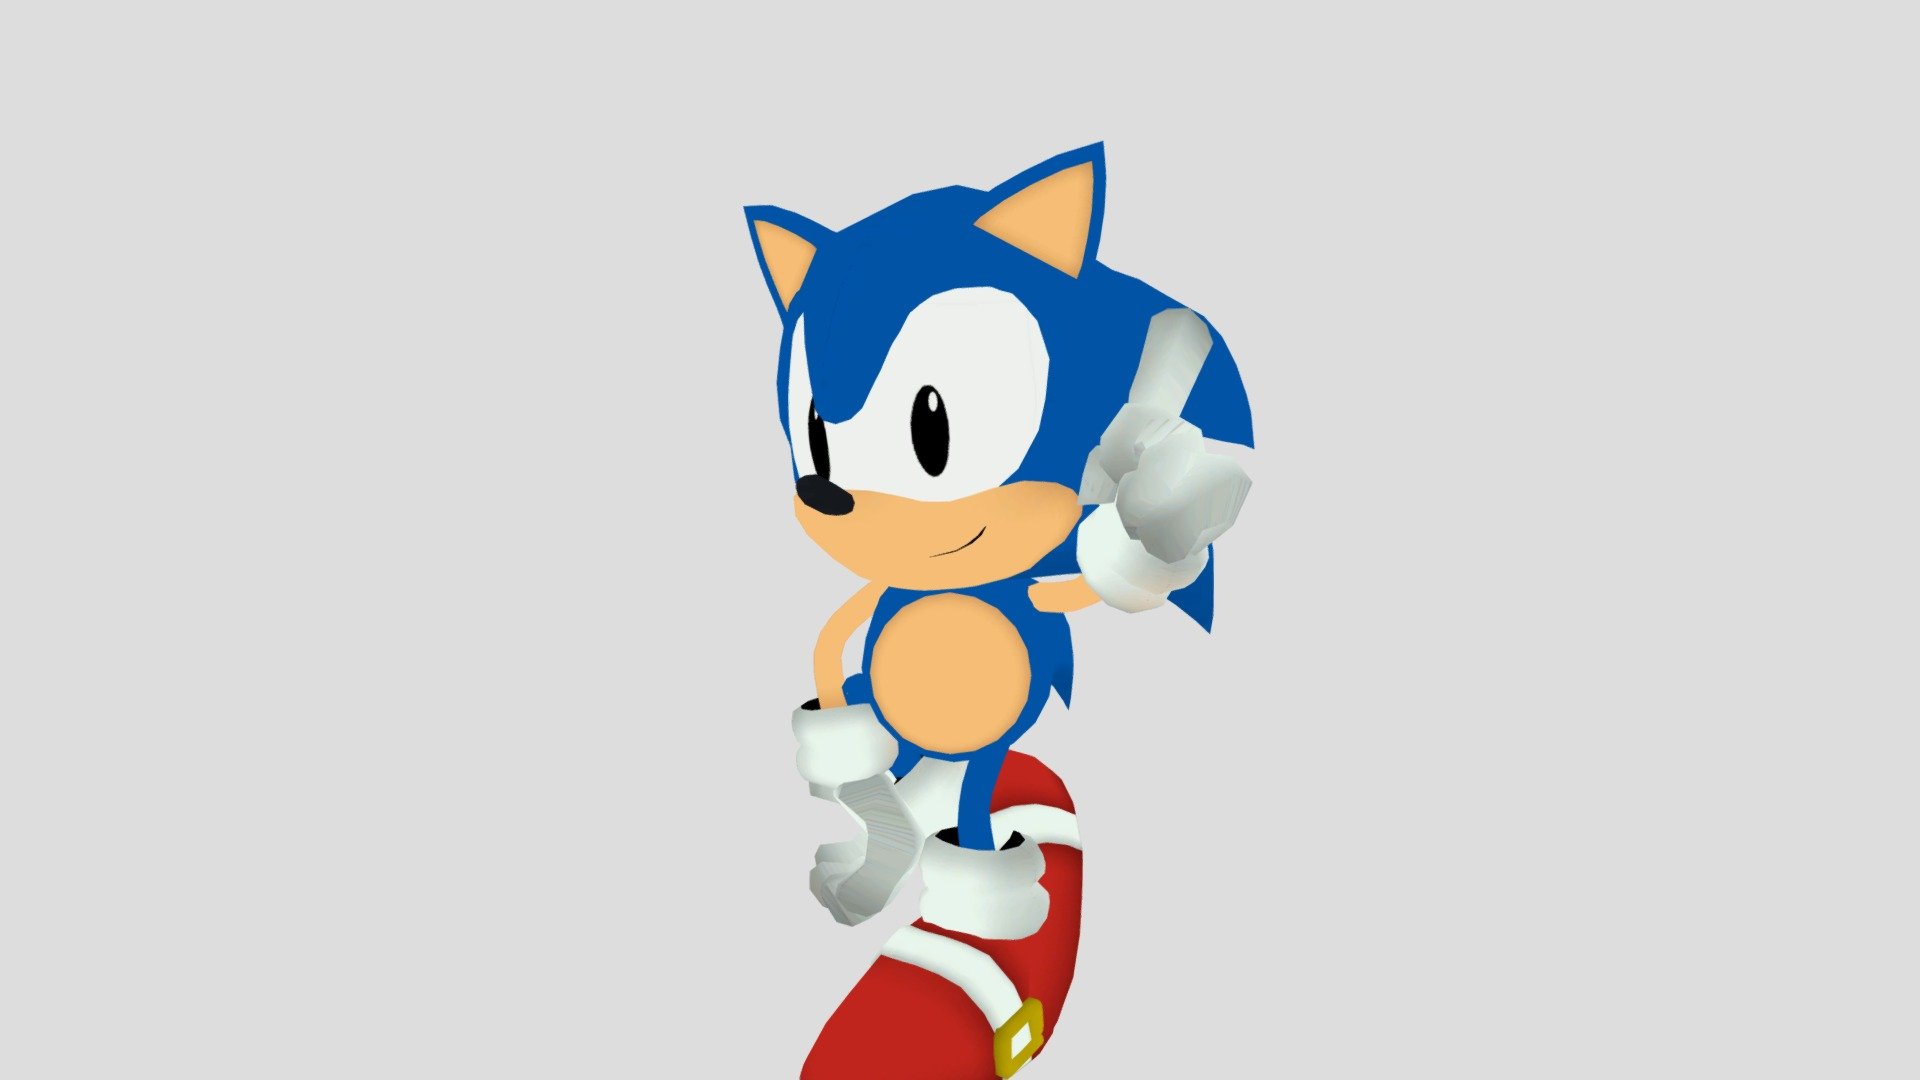 Pixel Frames Sonic The Hedgehog Idle Pose 9x9 inches (Big) Shadow Box Art :  Amazon.in: Home & Kitchen